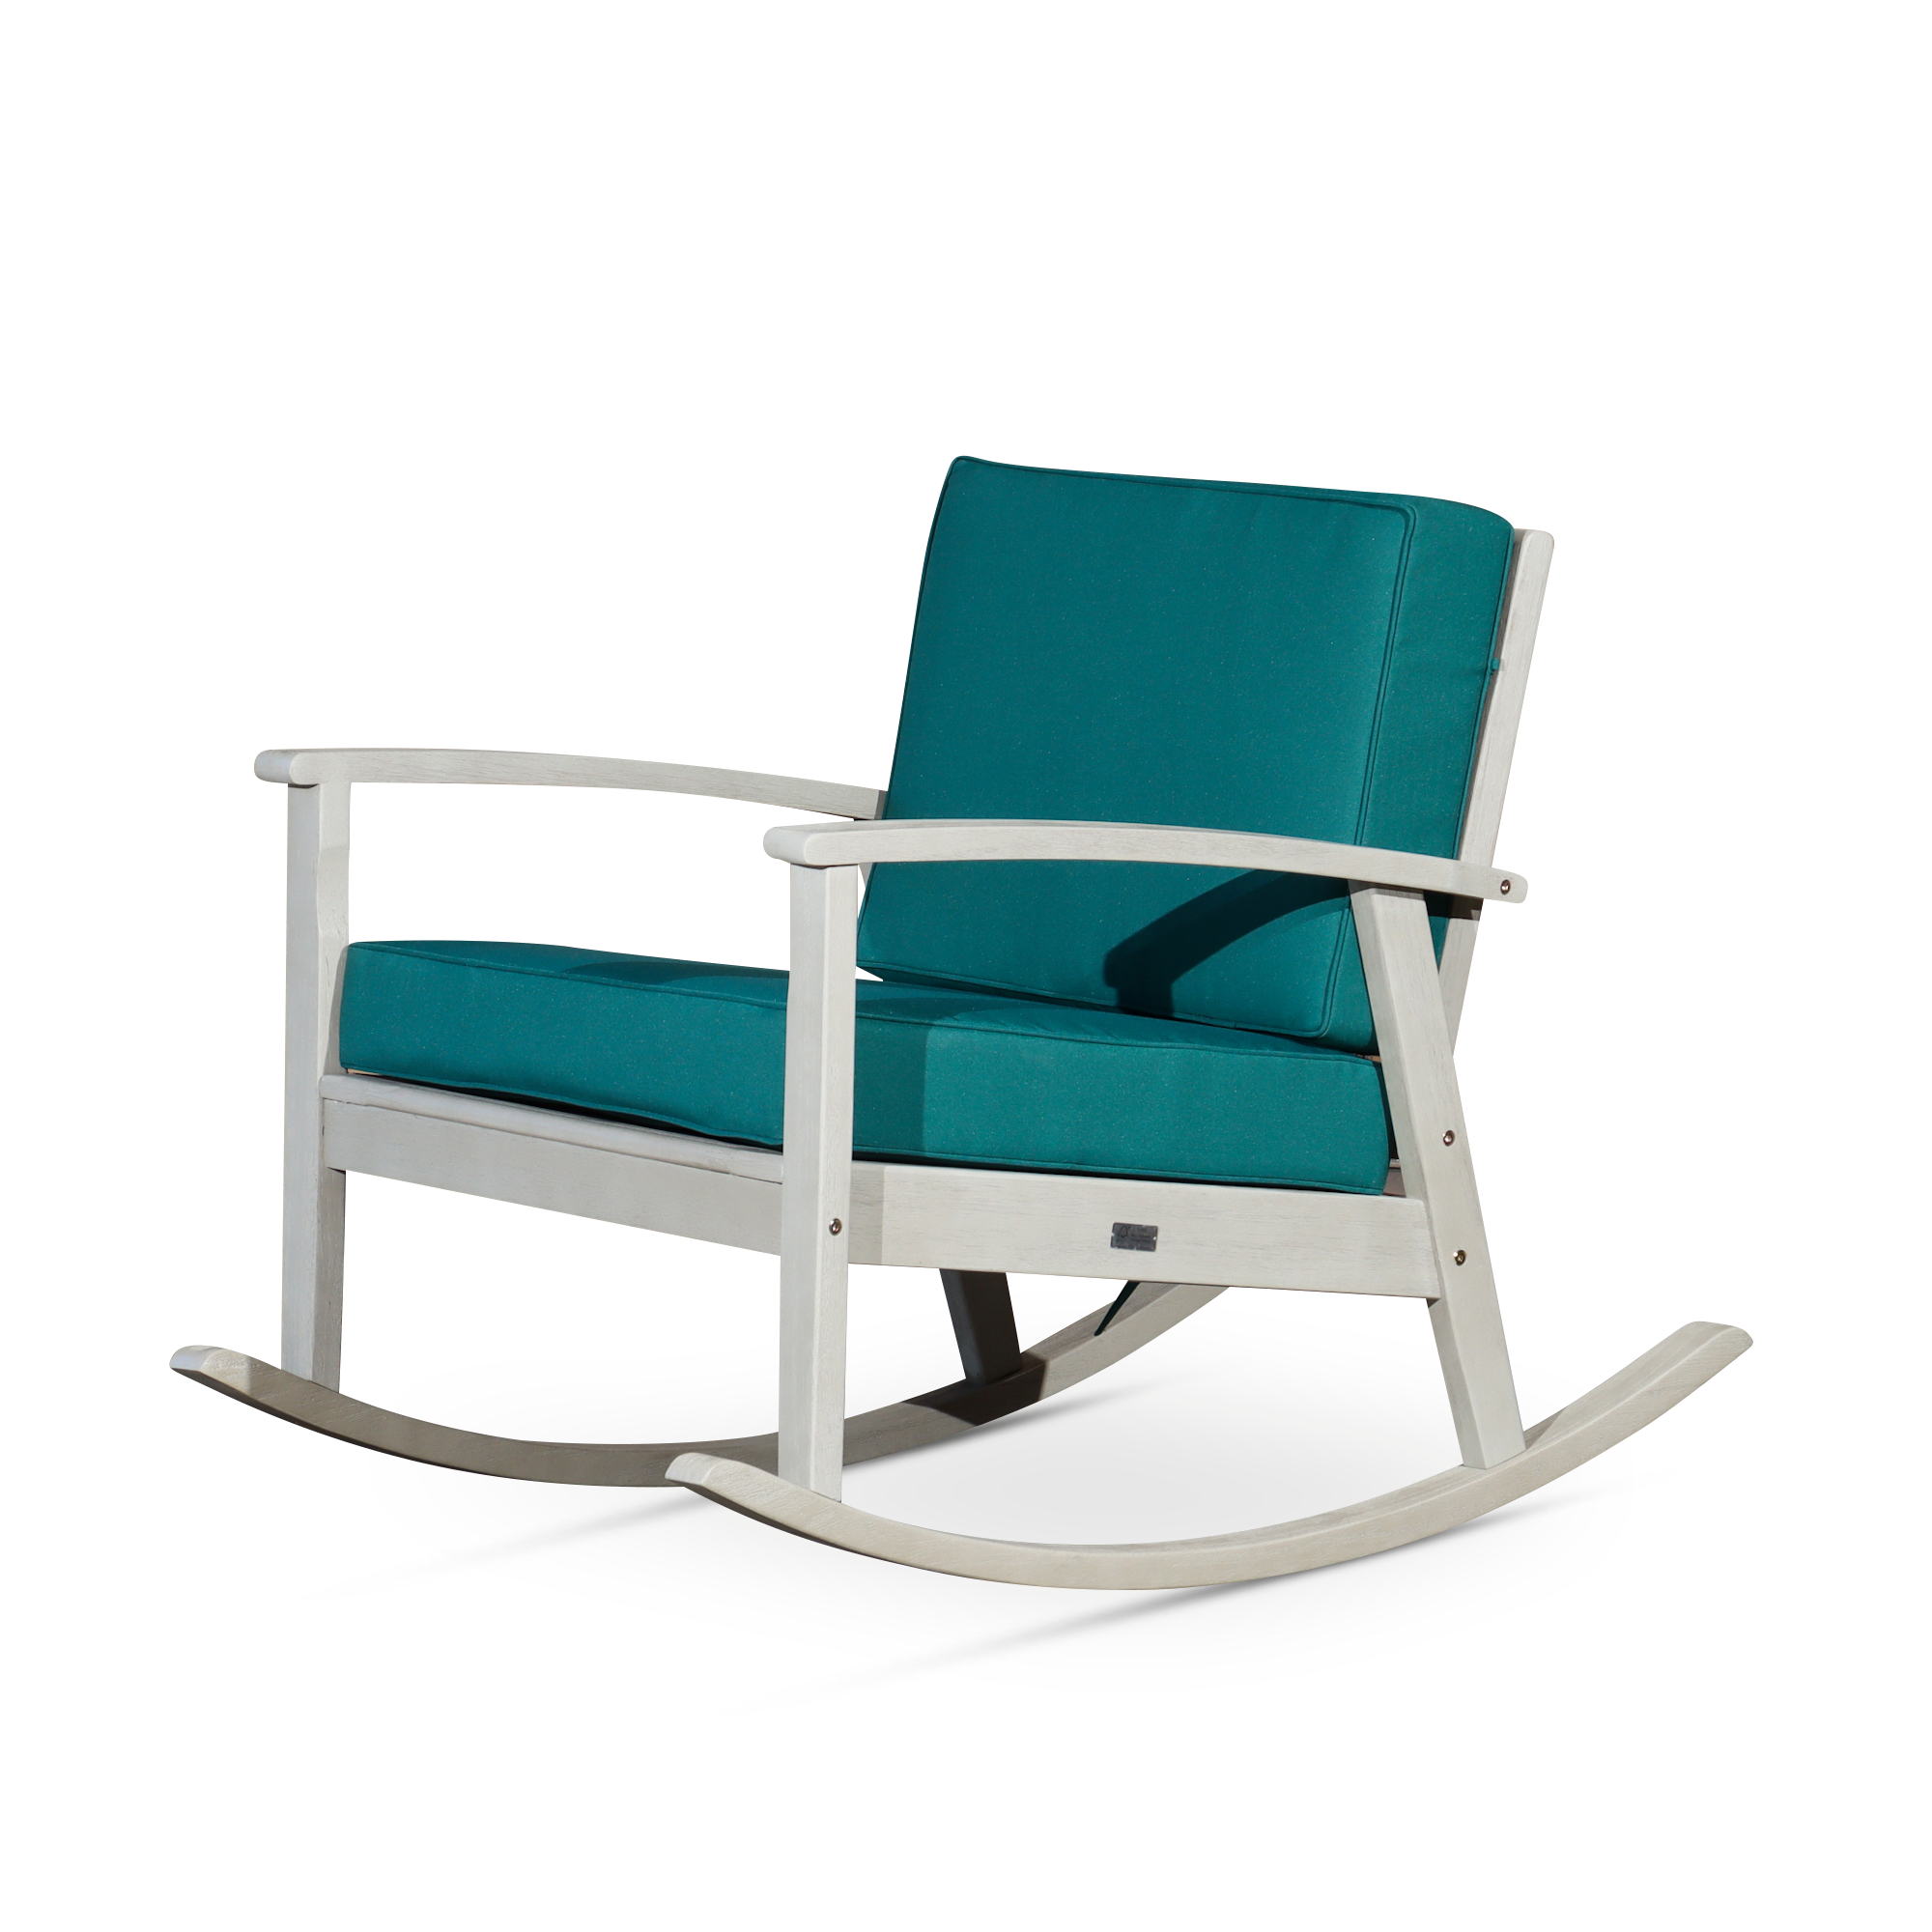 Outdoor-Rocking-Chair-with-Cushions,-Driftwood-Gray-Finish,-Dark-Green-Cushions-Outdoor-Chairs